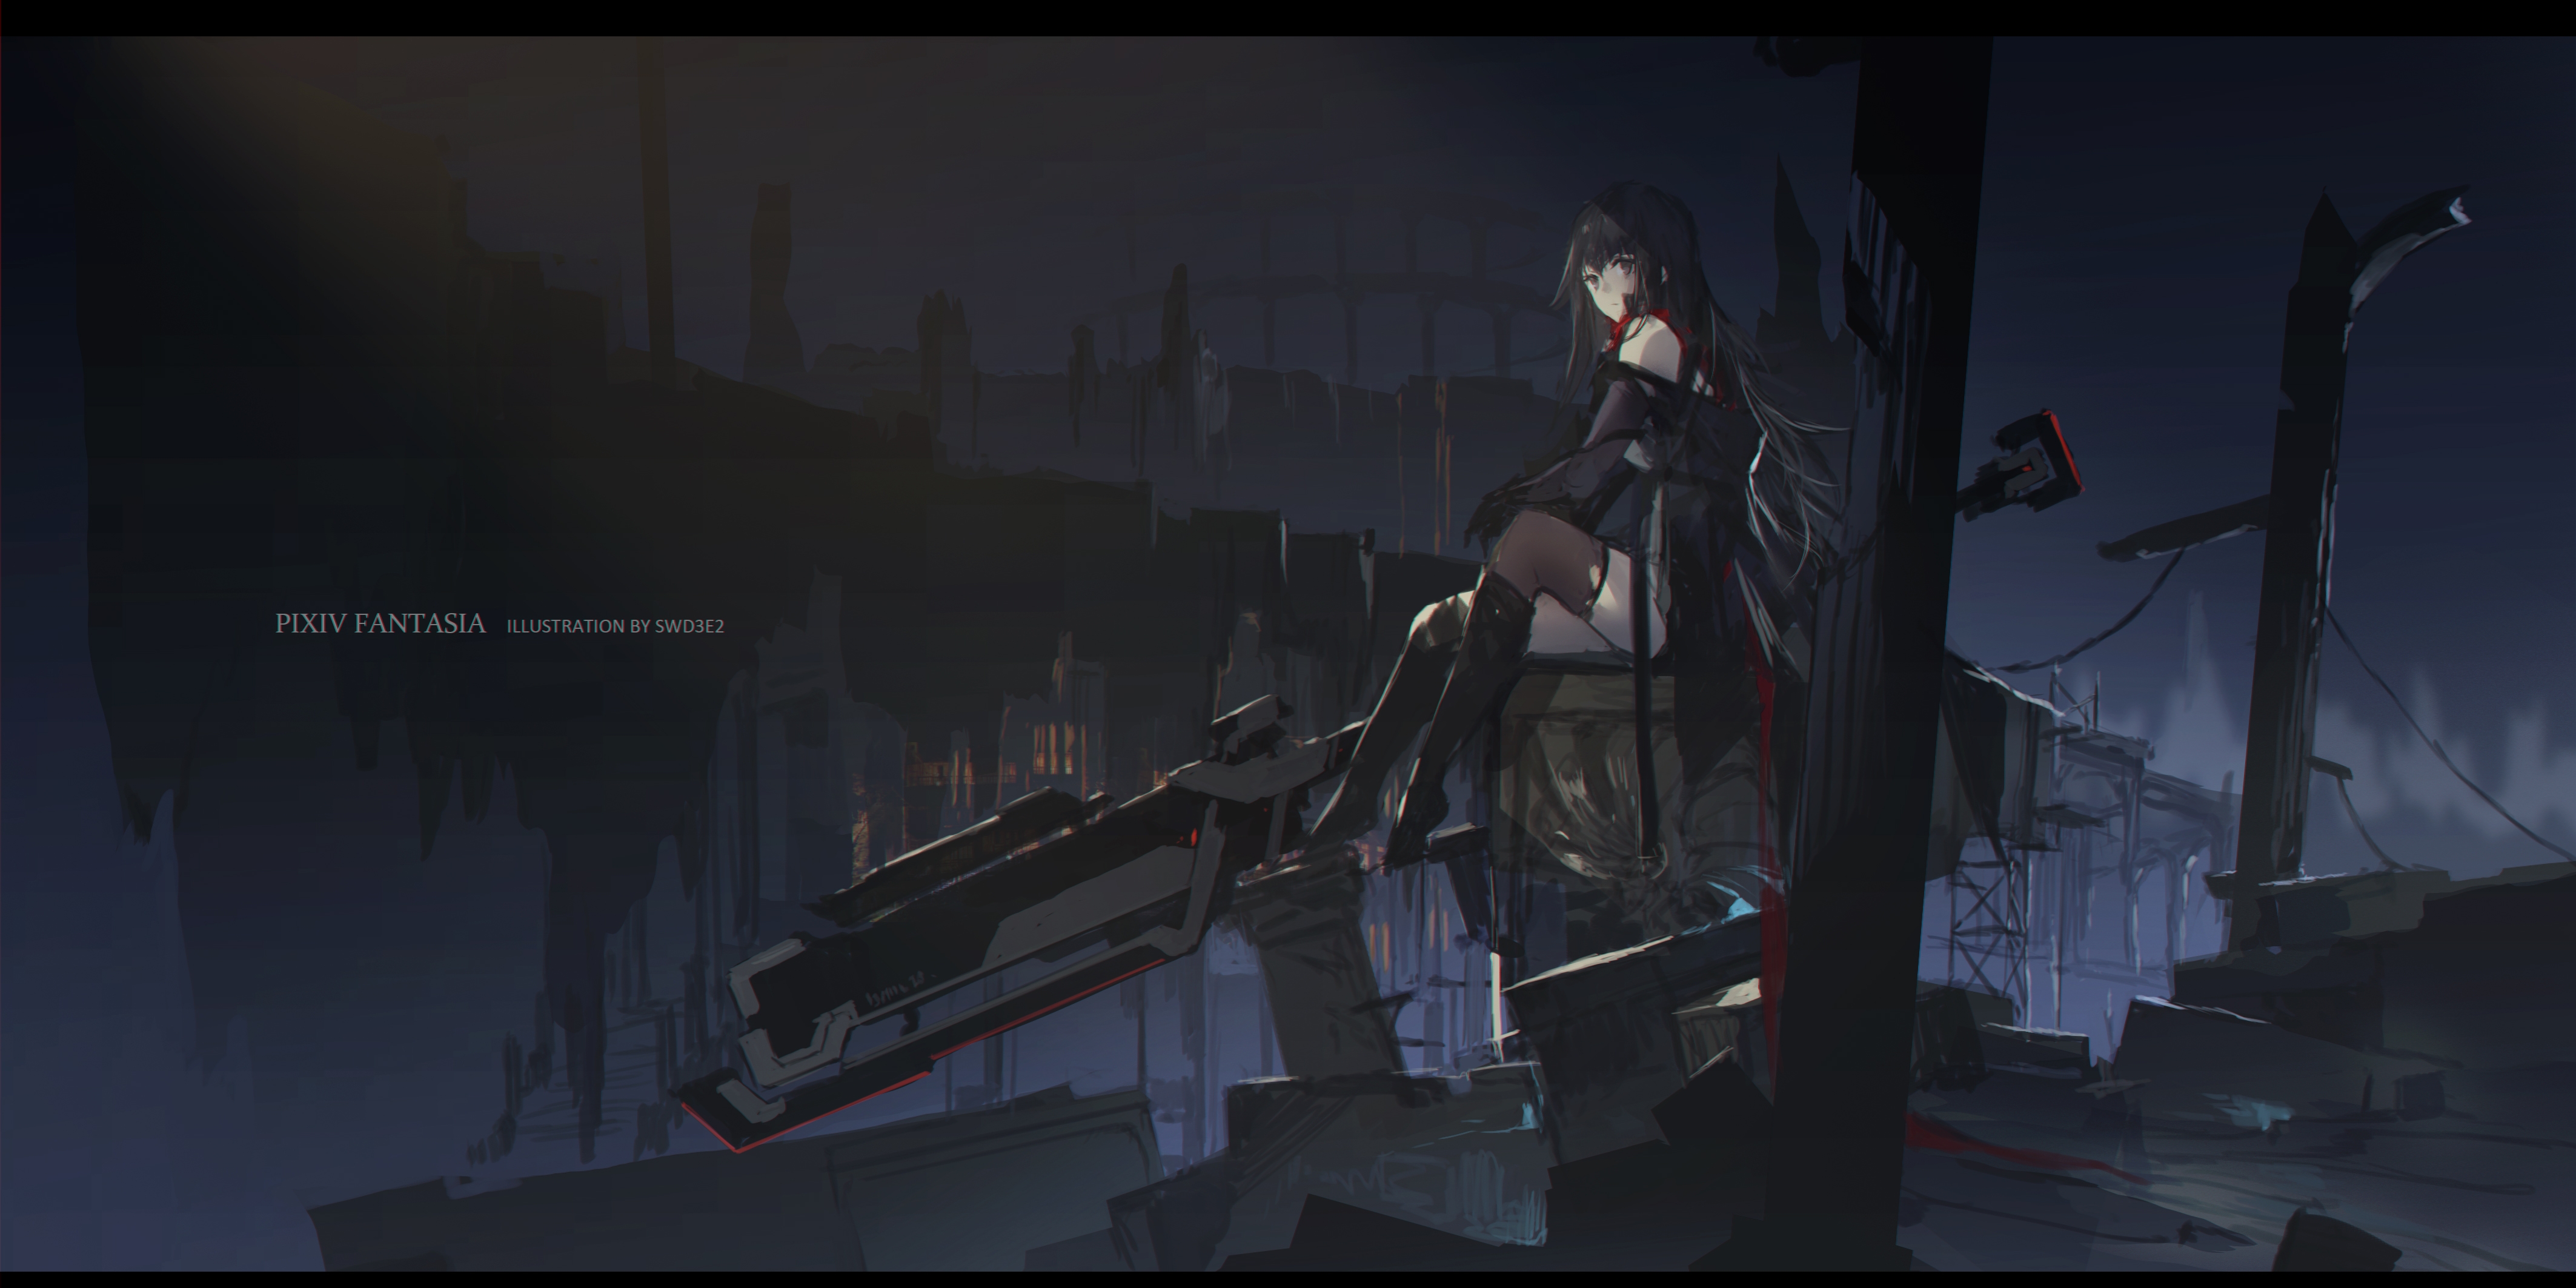 Anime 4252x2126 anime anime girls Swd3e2 Pixiv Fantasia original characters weapon thigh-highs elbow gloves